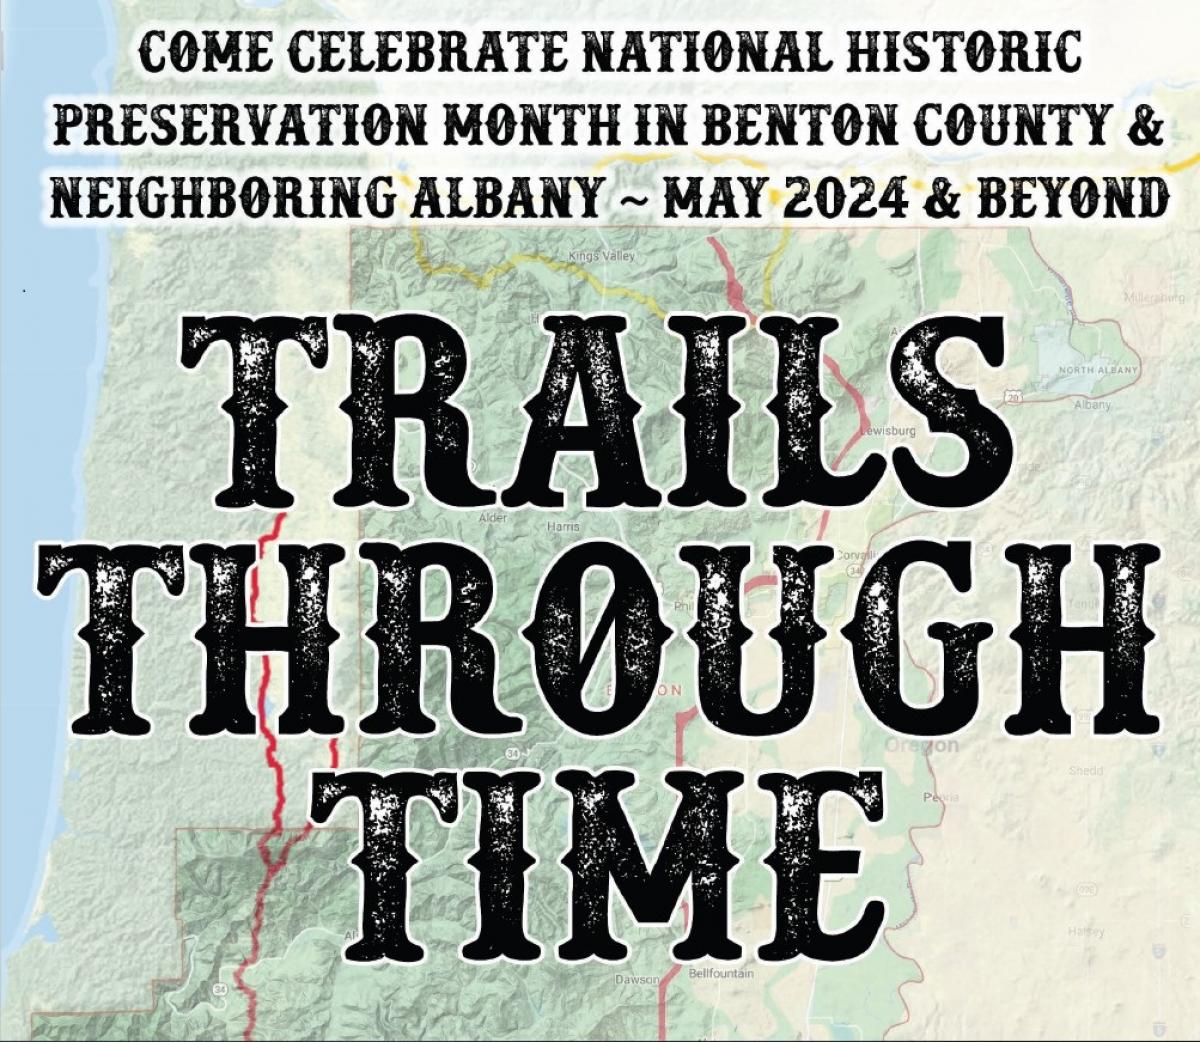 Trails Through Time - 2024 Historic Preservation Month